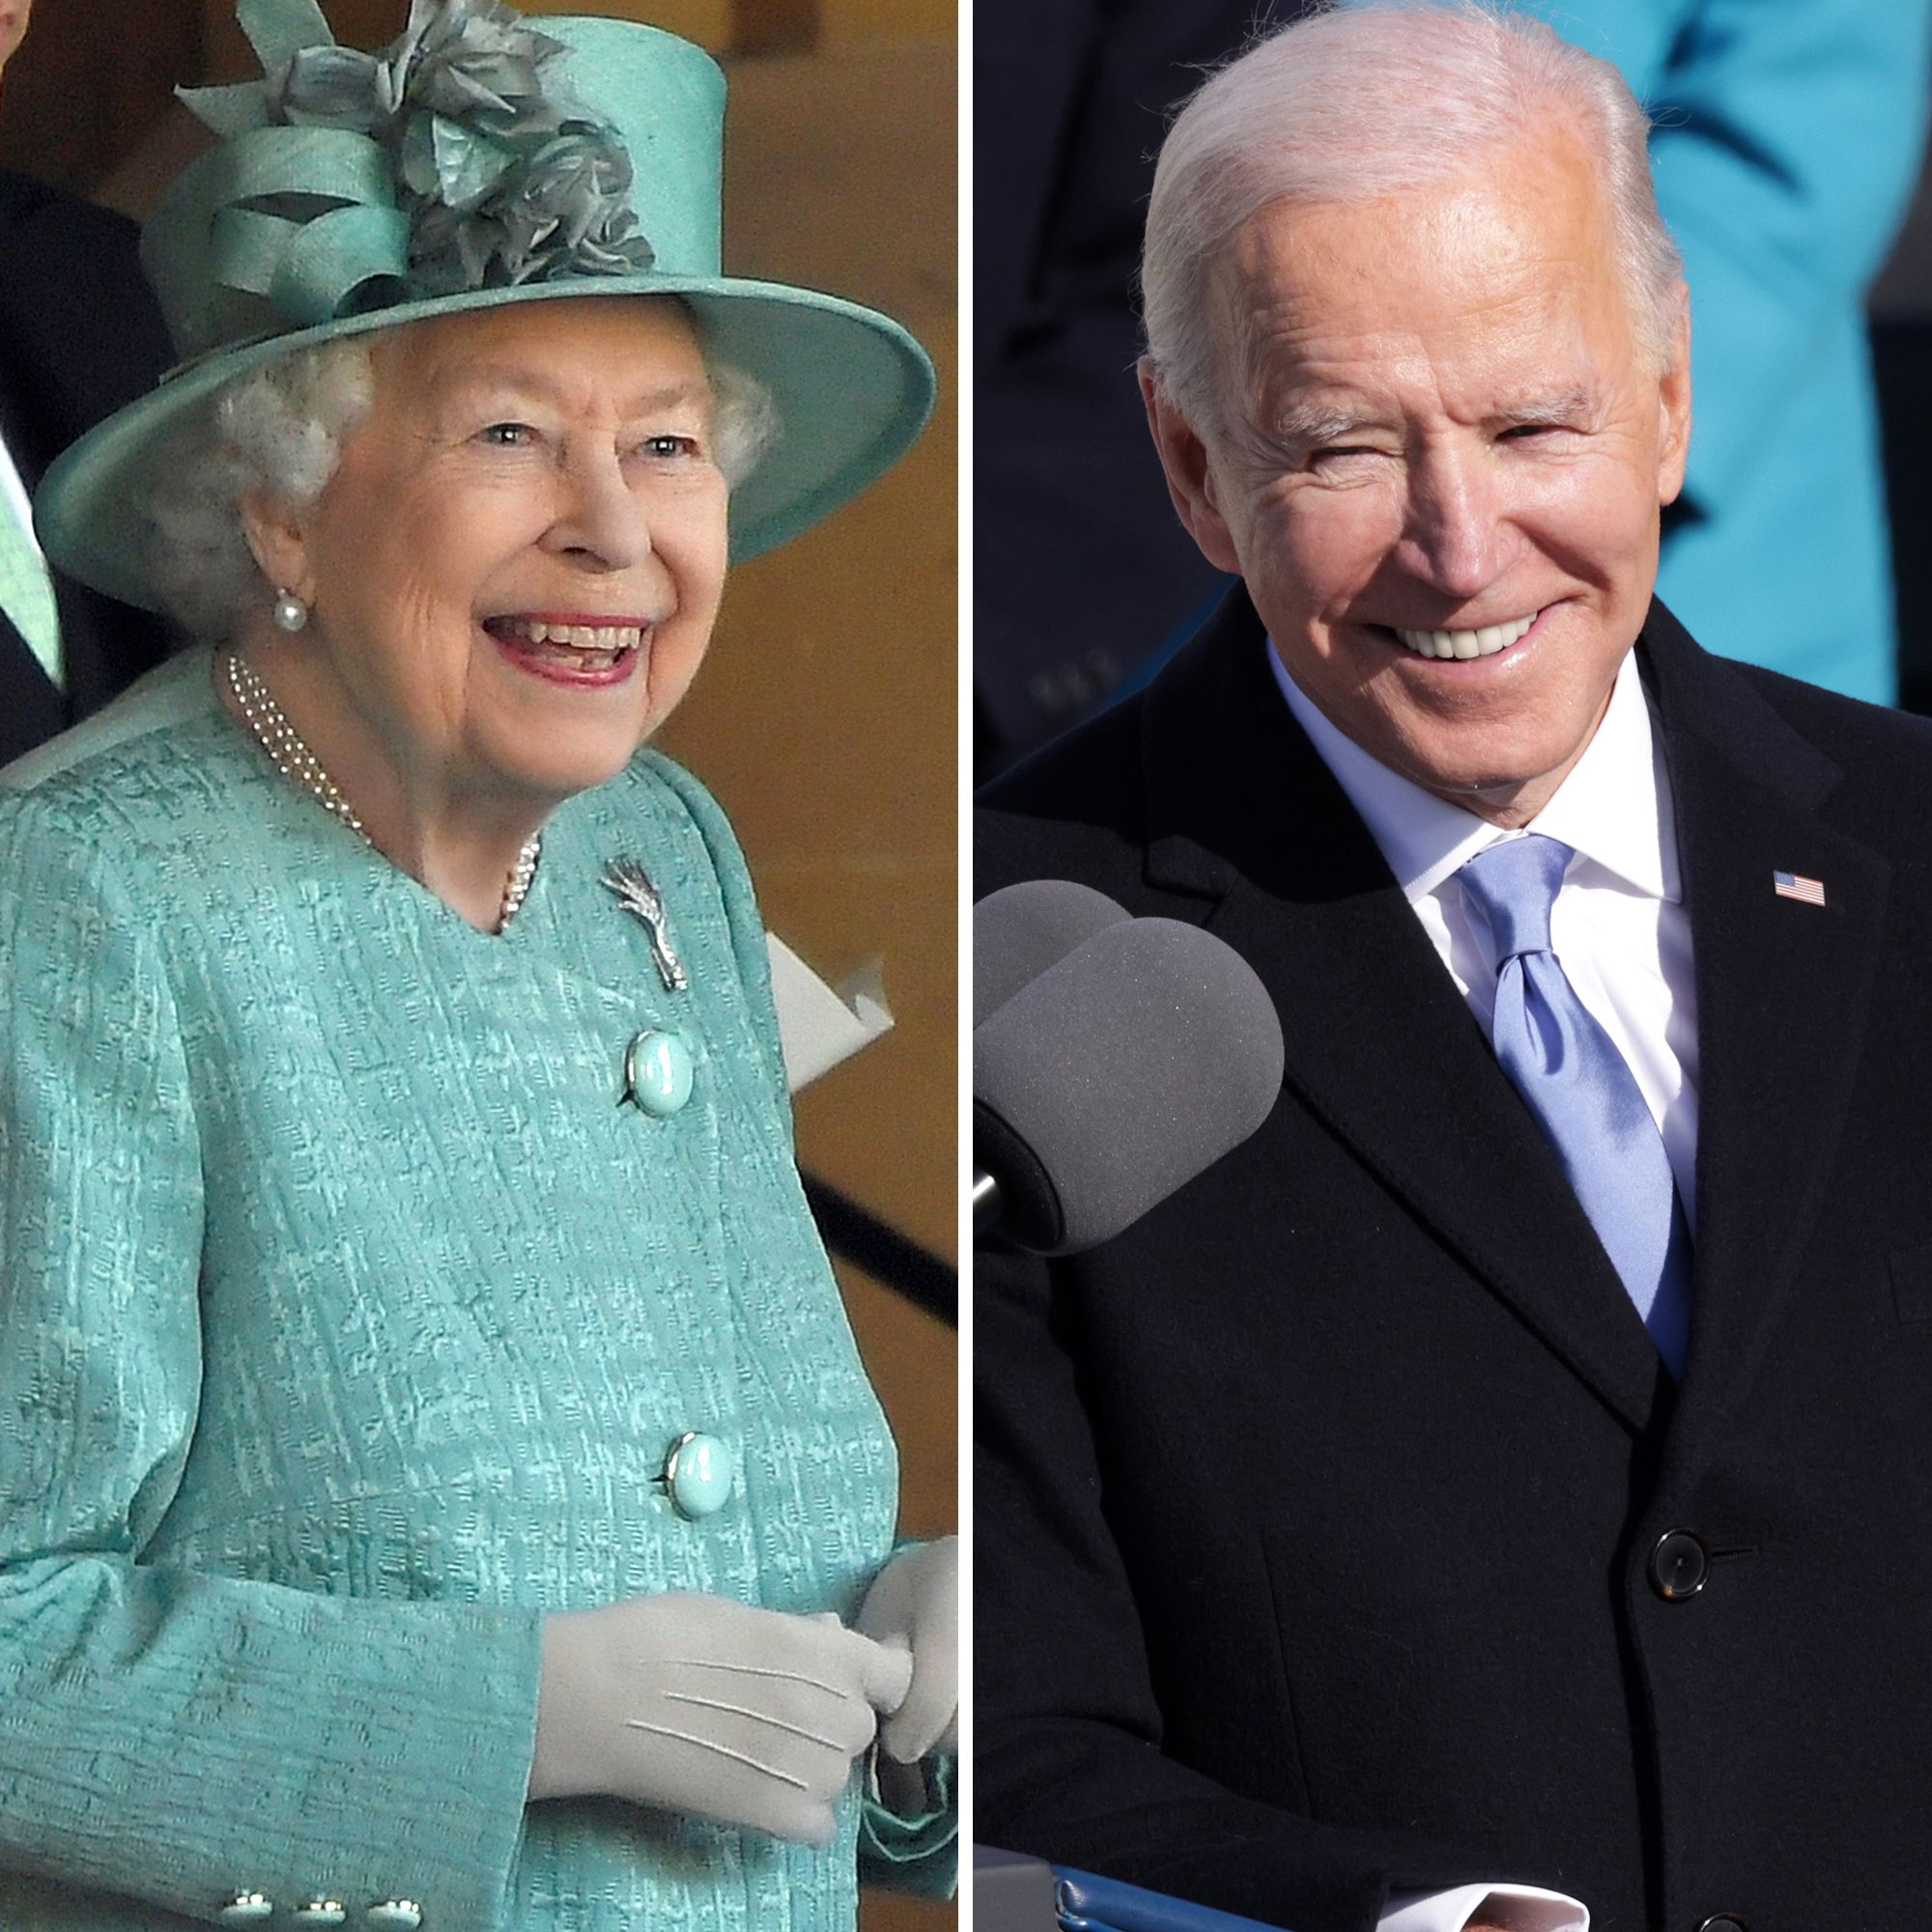 The Queen Sent President Biden a Private Note Ahead of the Inauguration